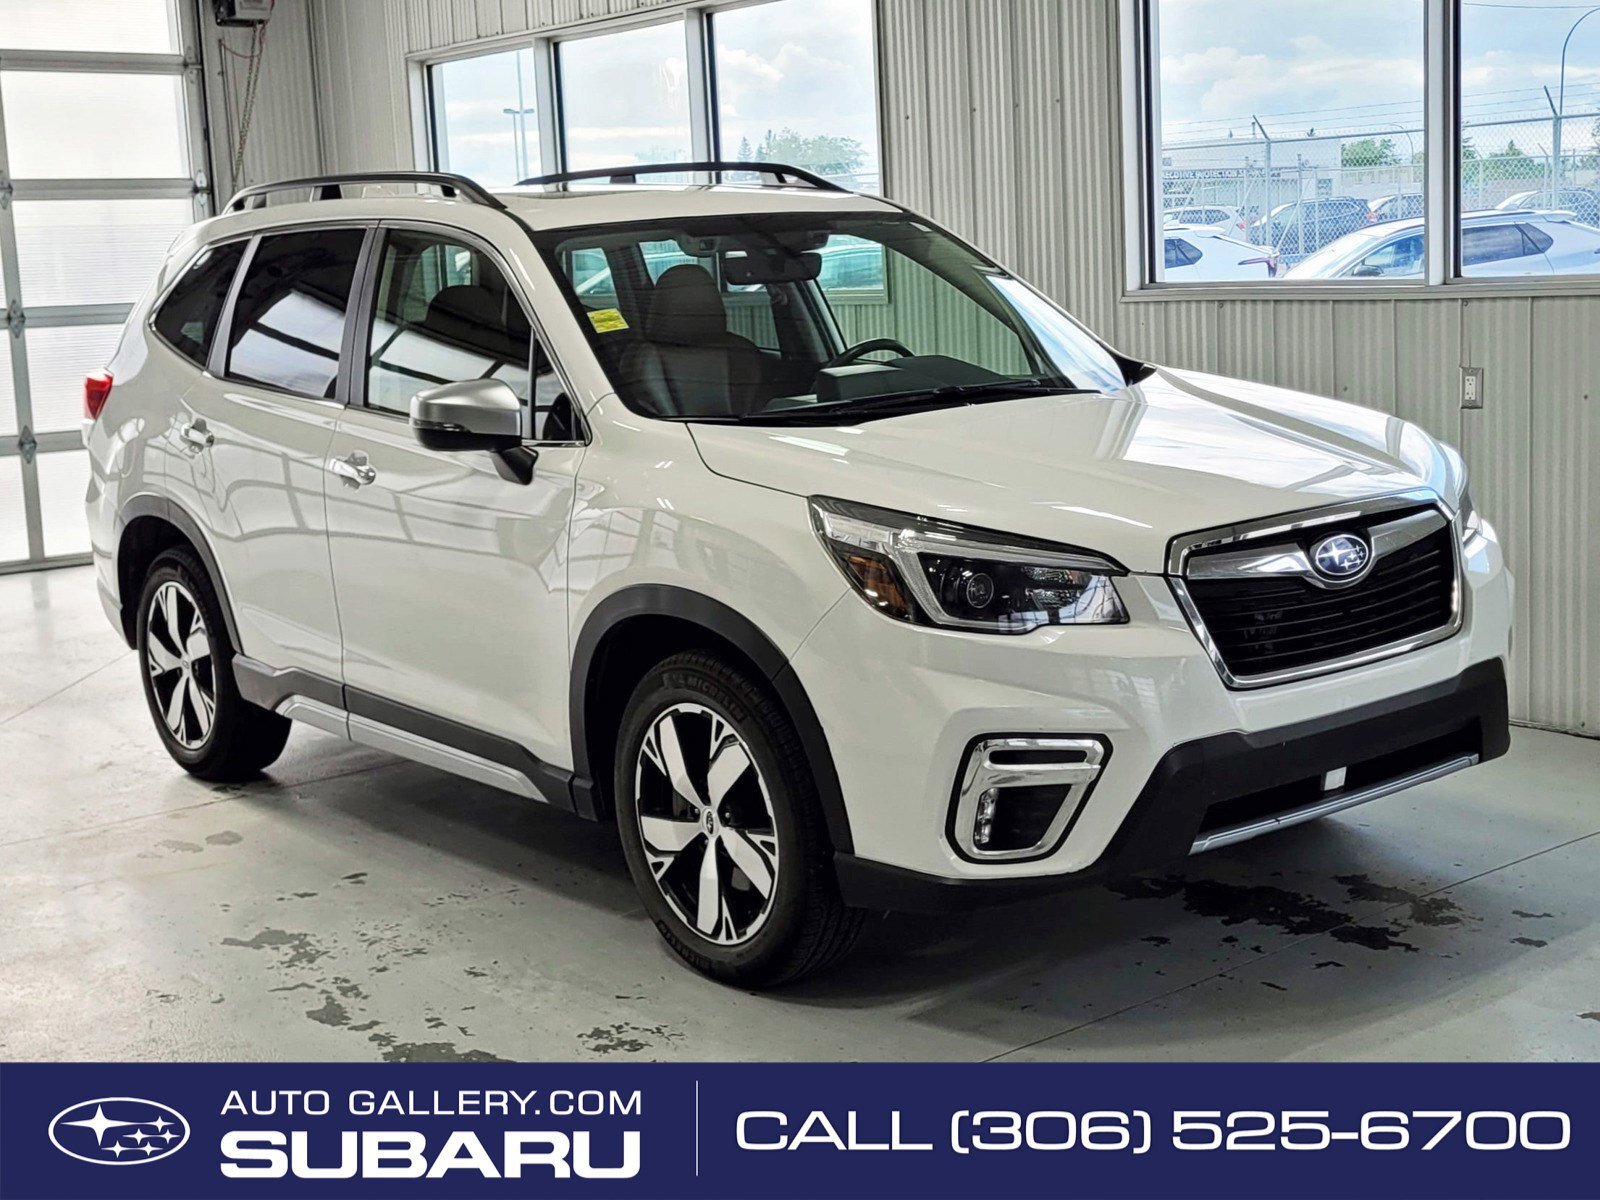 2021 Subaru Forester Premier AWD | BROWN LEATHER | PANORAMIC ROOF